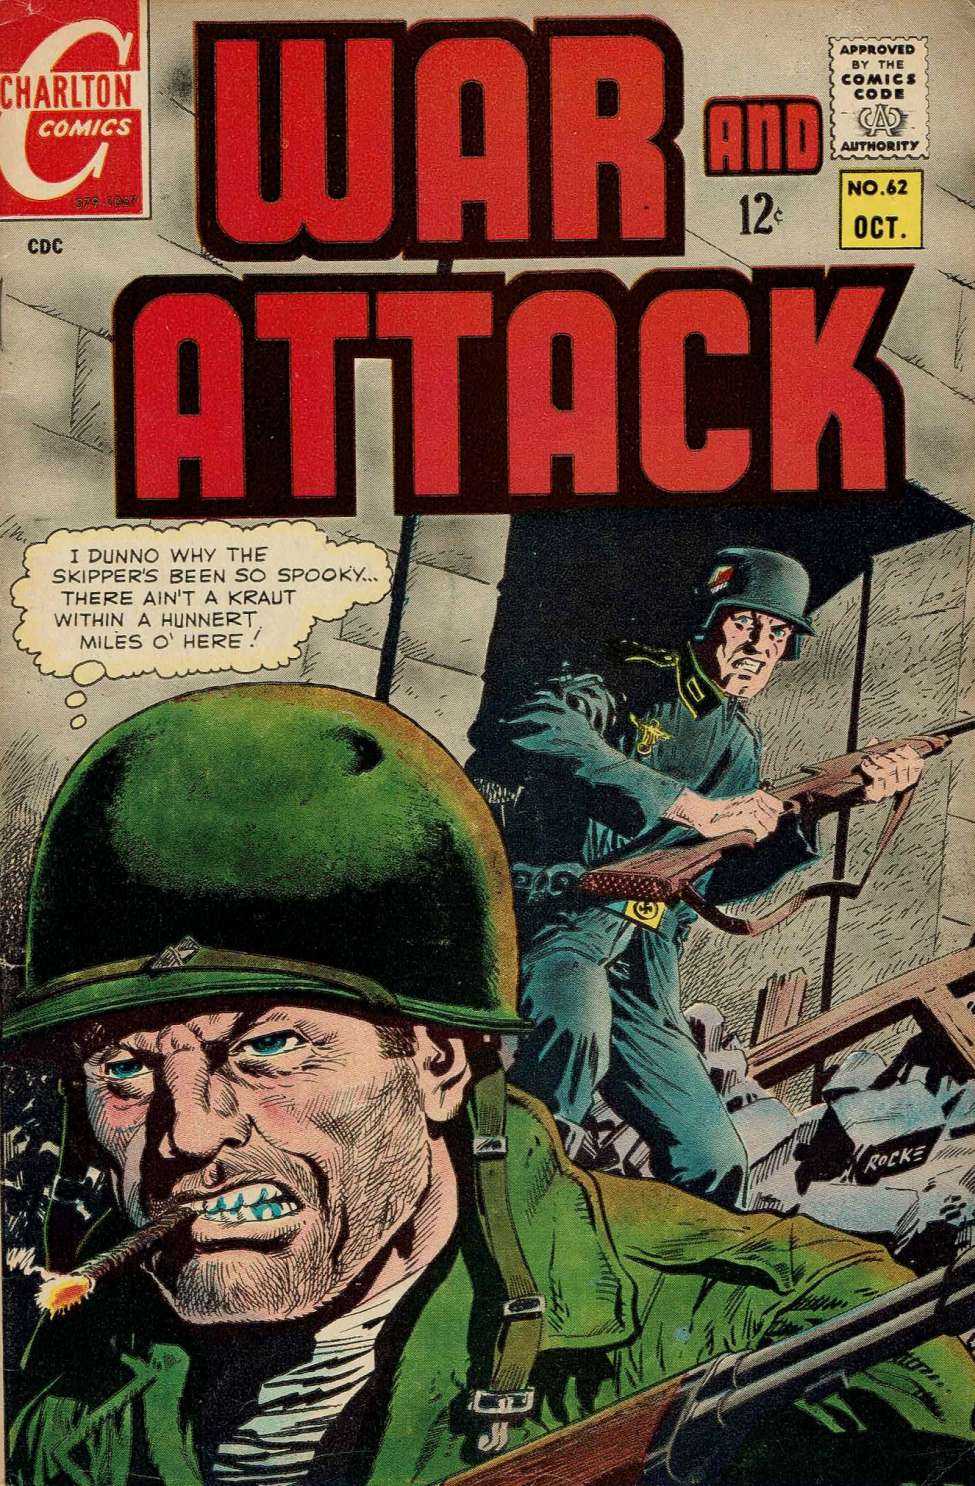 Book Cover For War and Attack 62